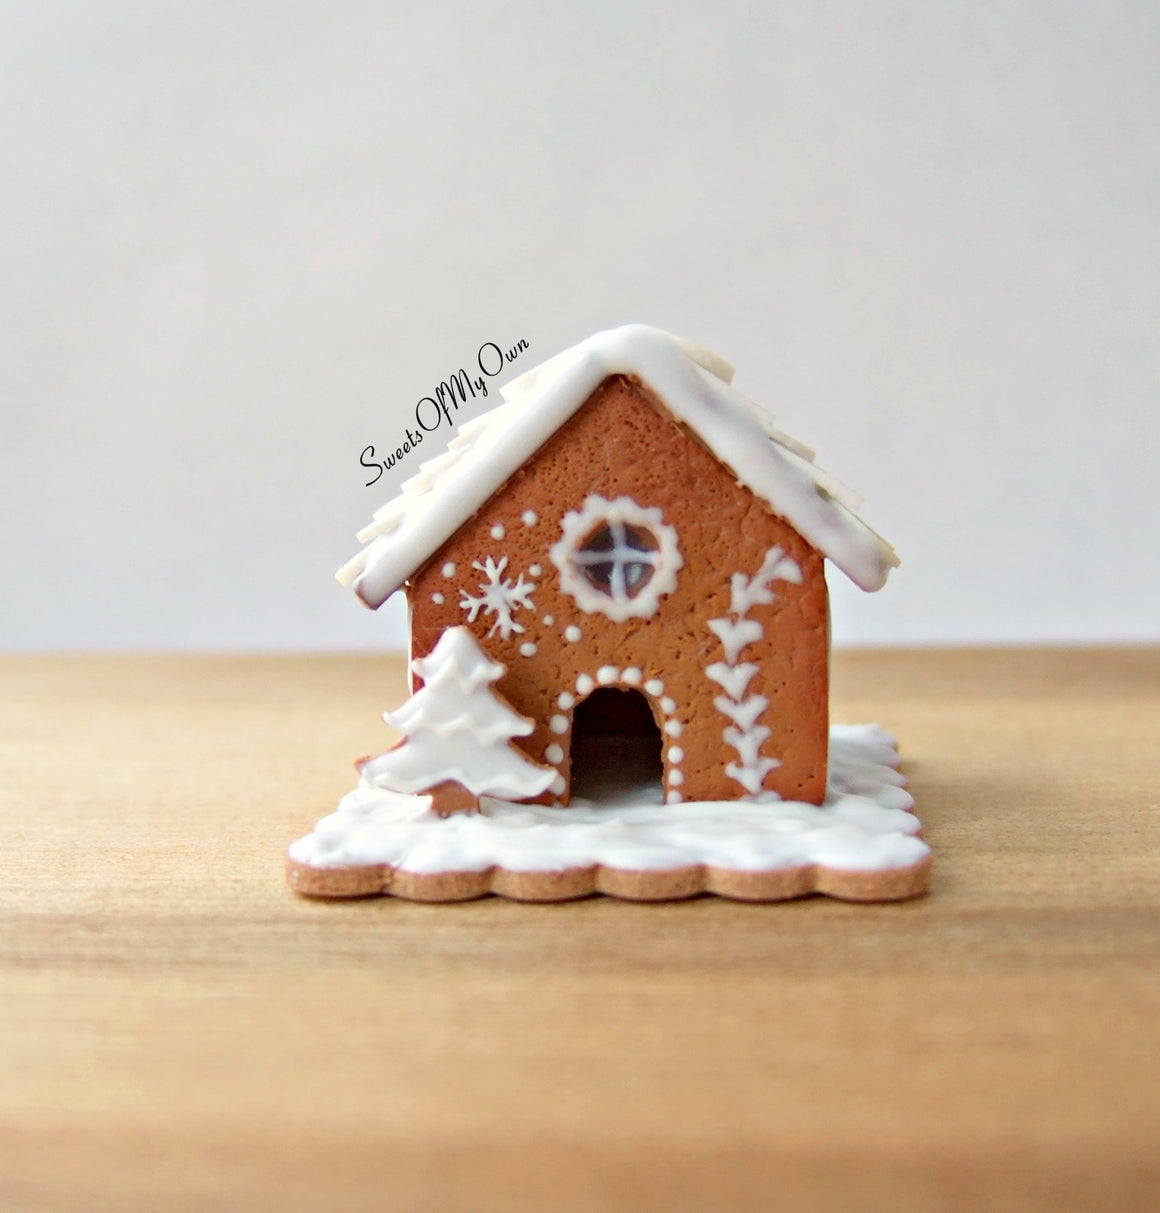 Miniature White Icing Style 4 Gingerbread House 1:12 Scale - SweetsOfMyOwn